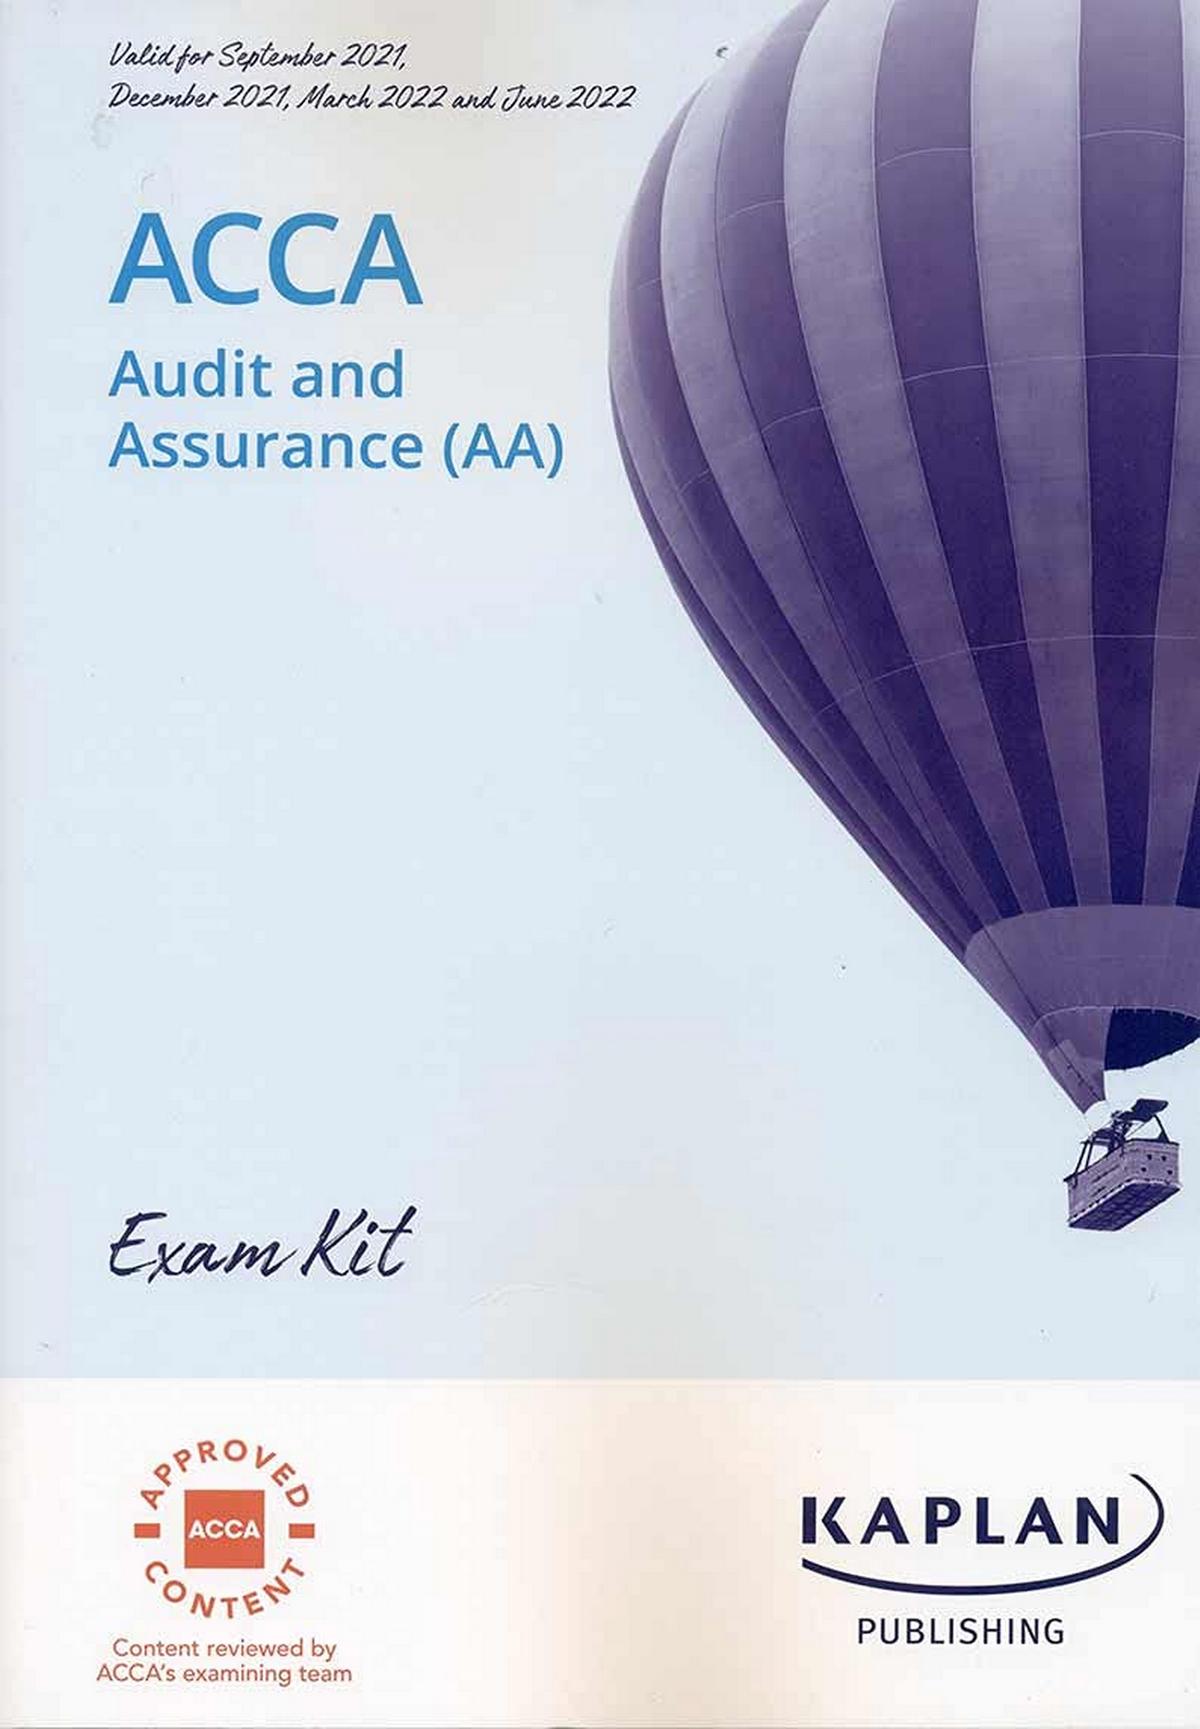 Acca Audit and Assurance (AA) Exam kit